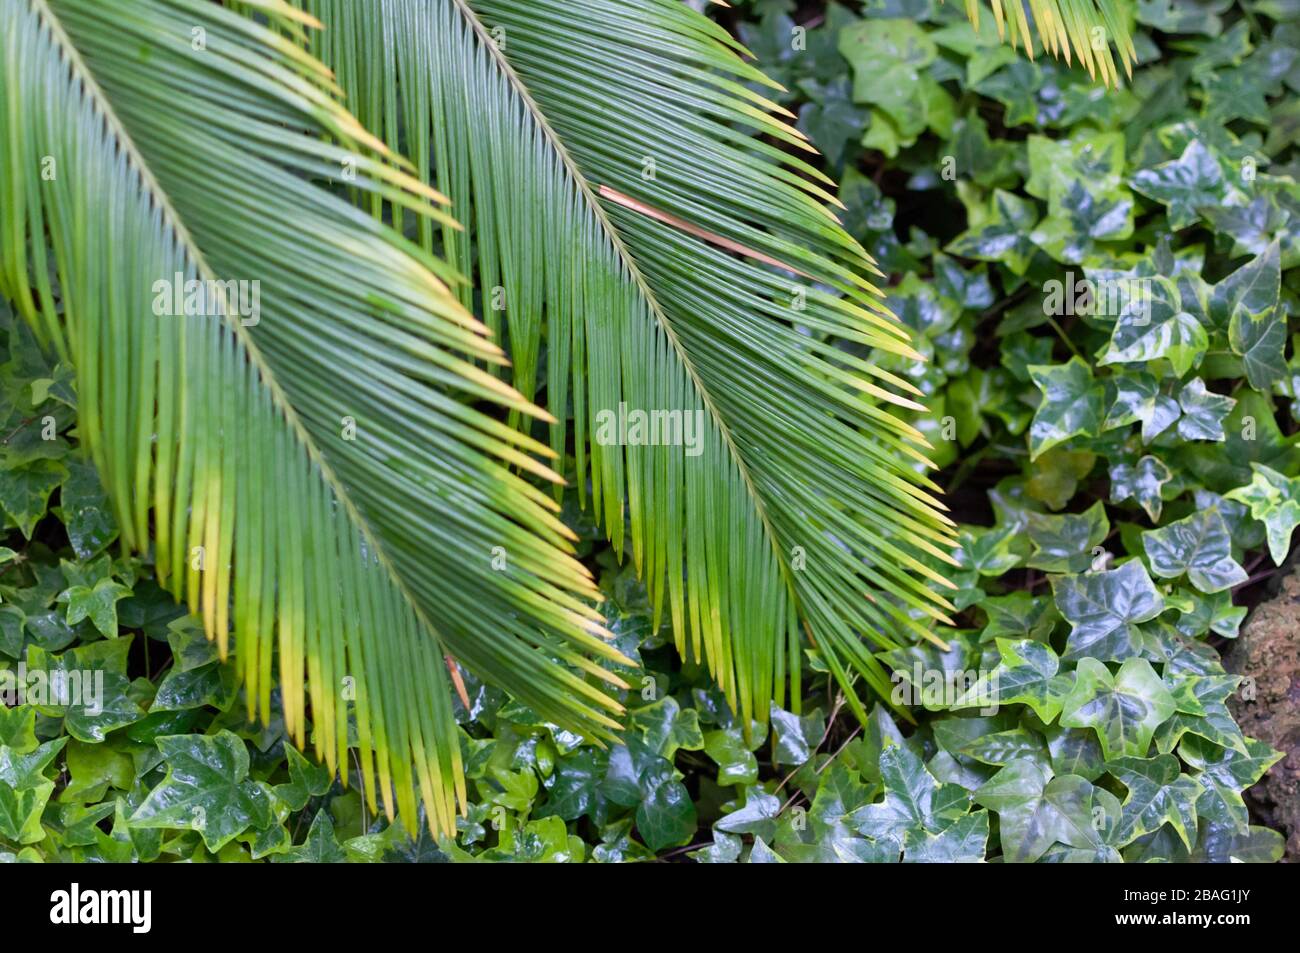 Green leaves of Cycas Tree Japan with yellow tips, background with leaf of ivy. Stock Photo